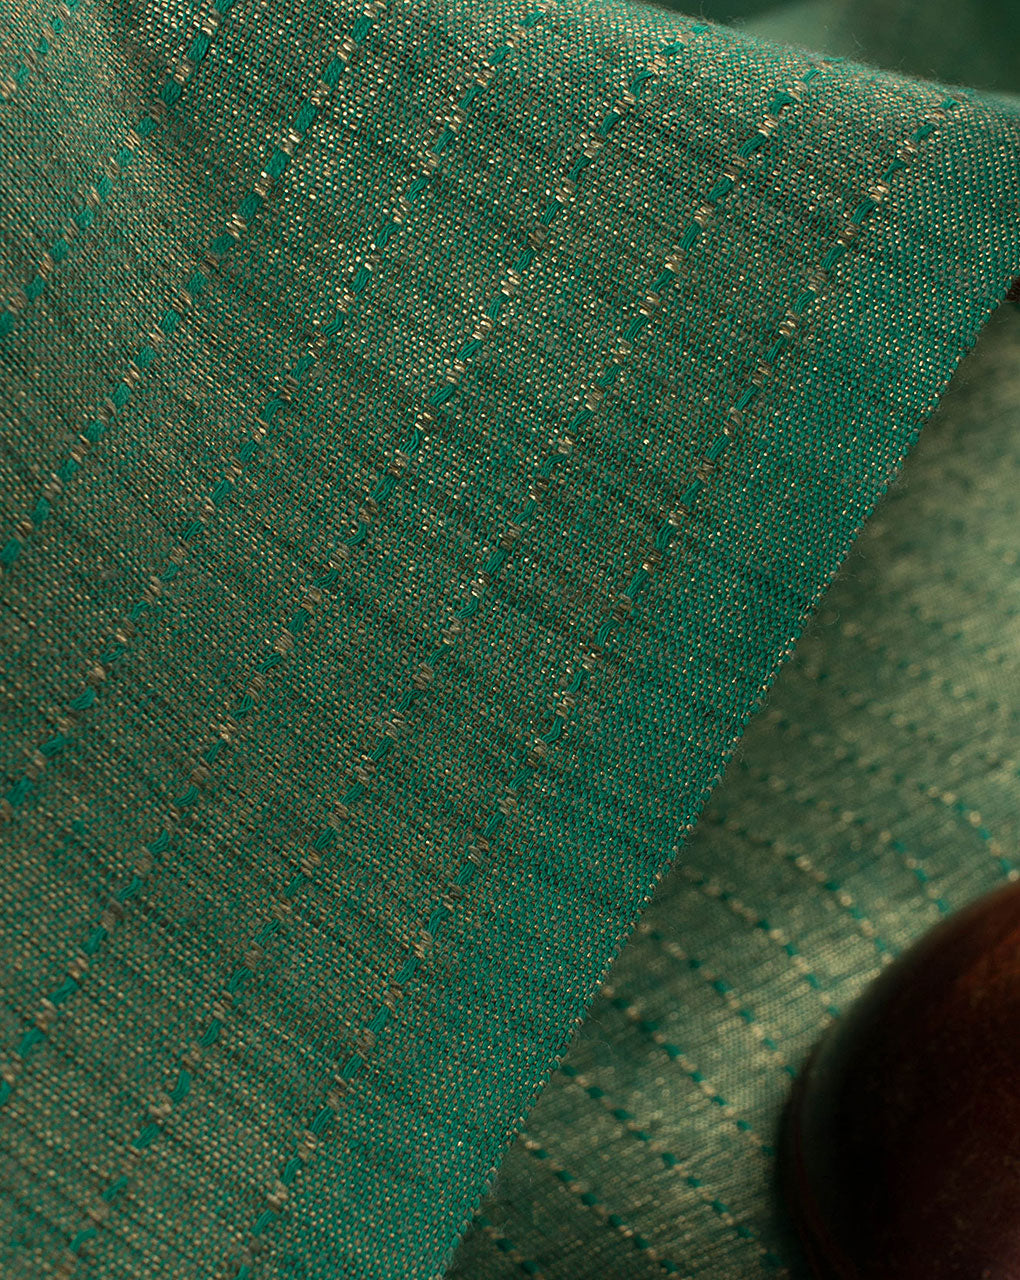 Woven Kantha Loom Textured Cotton Fabric - Fabriclore.com